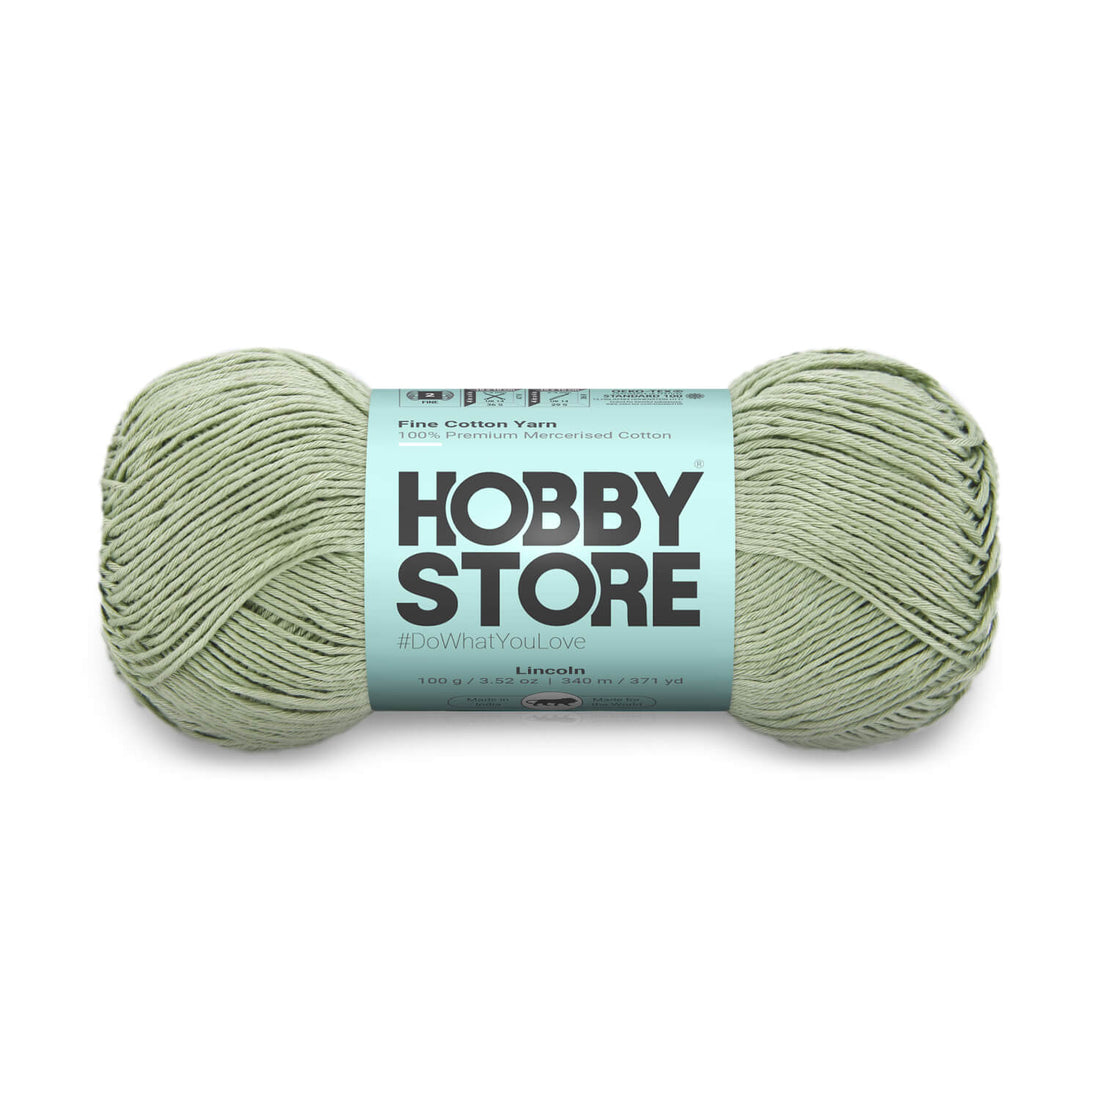 Fine Mercerised Cotton Yarn by Hobby Store - Lincoln - 227